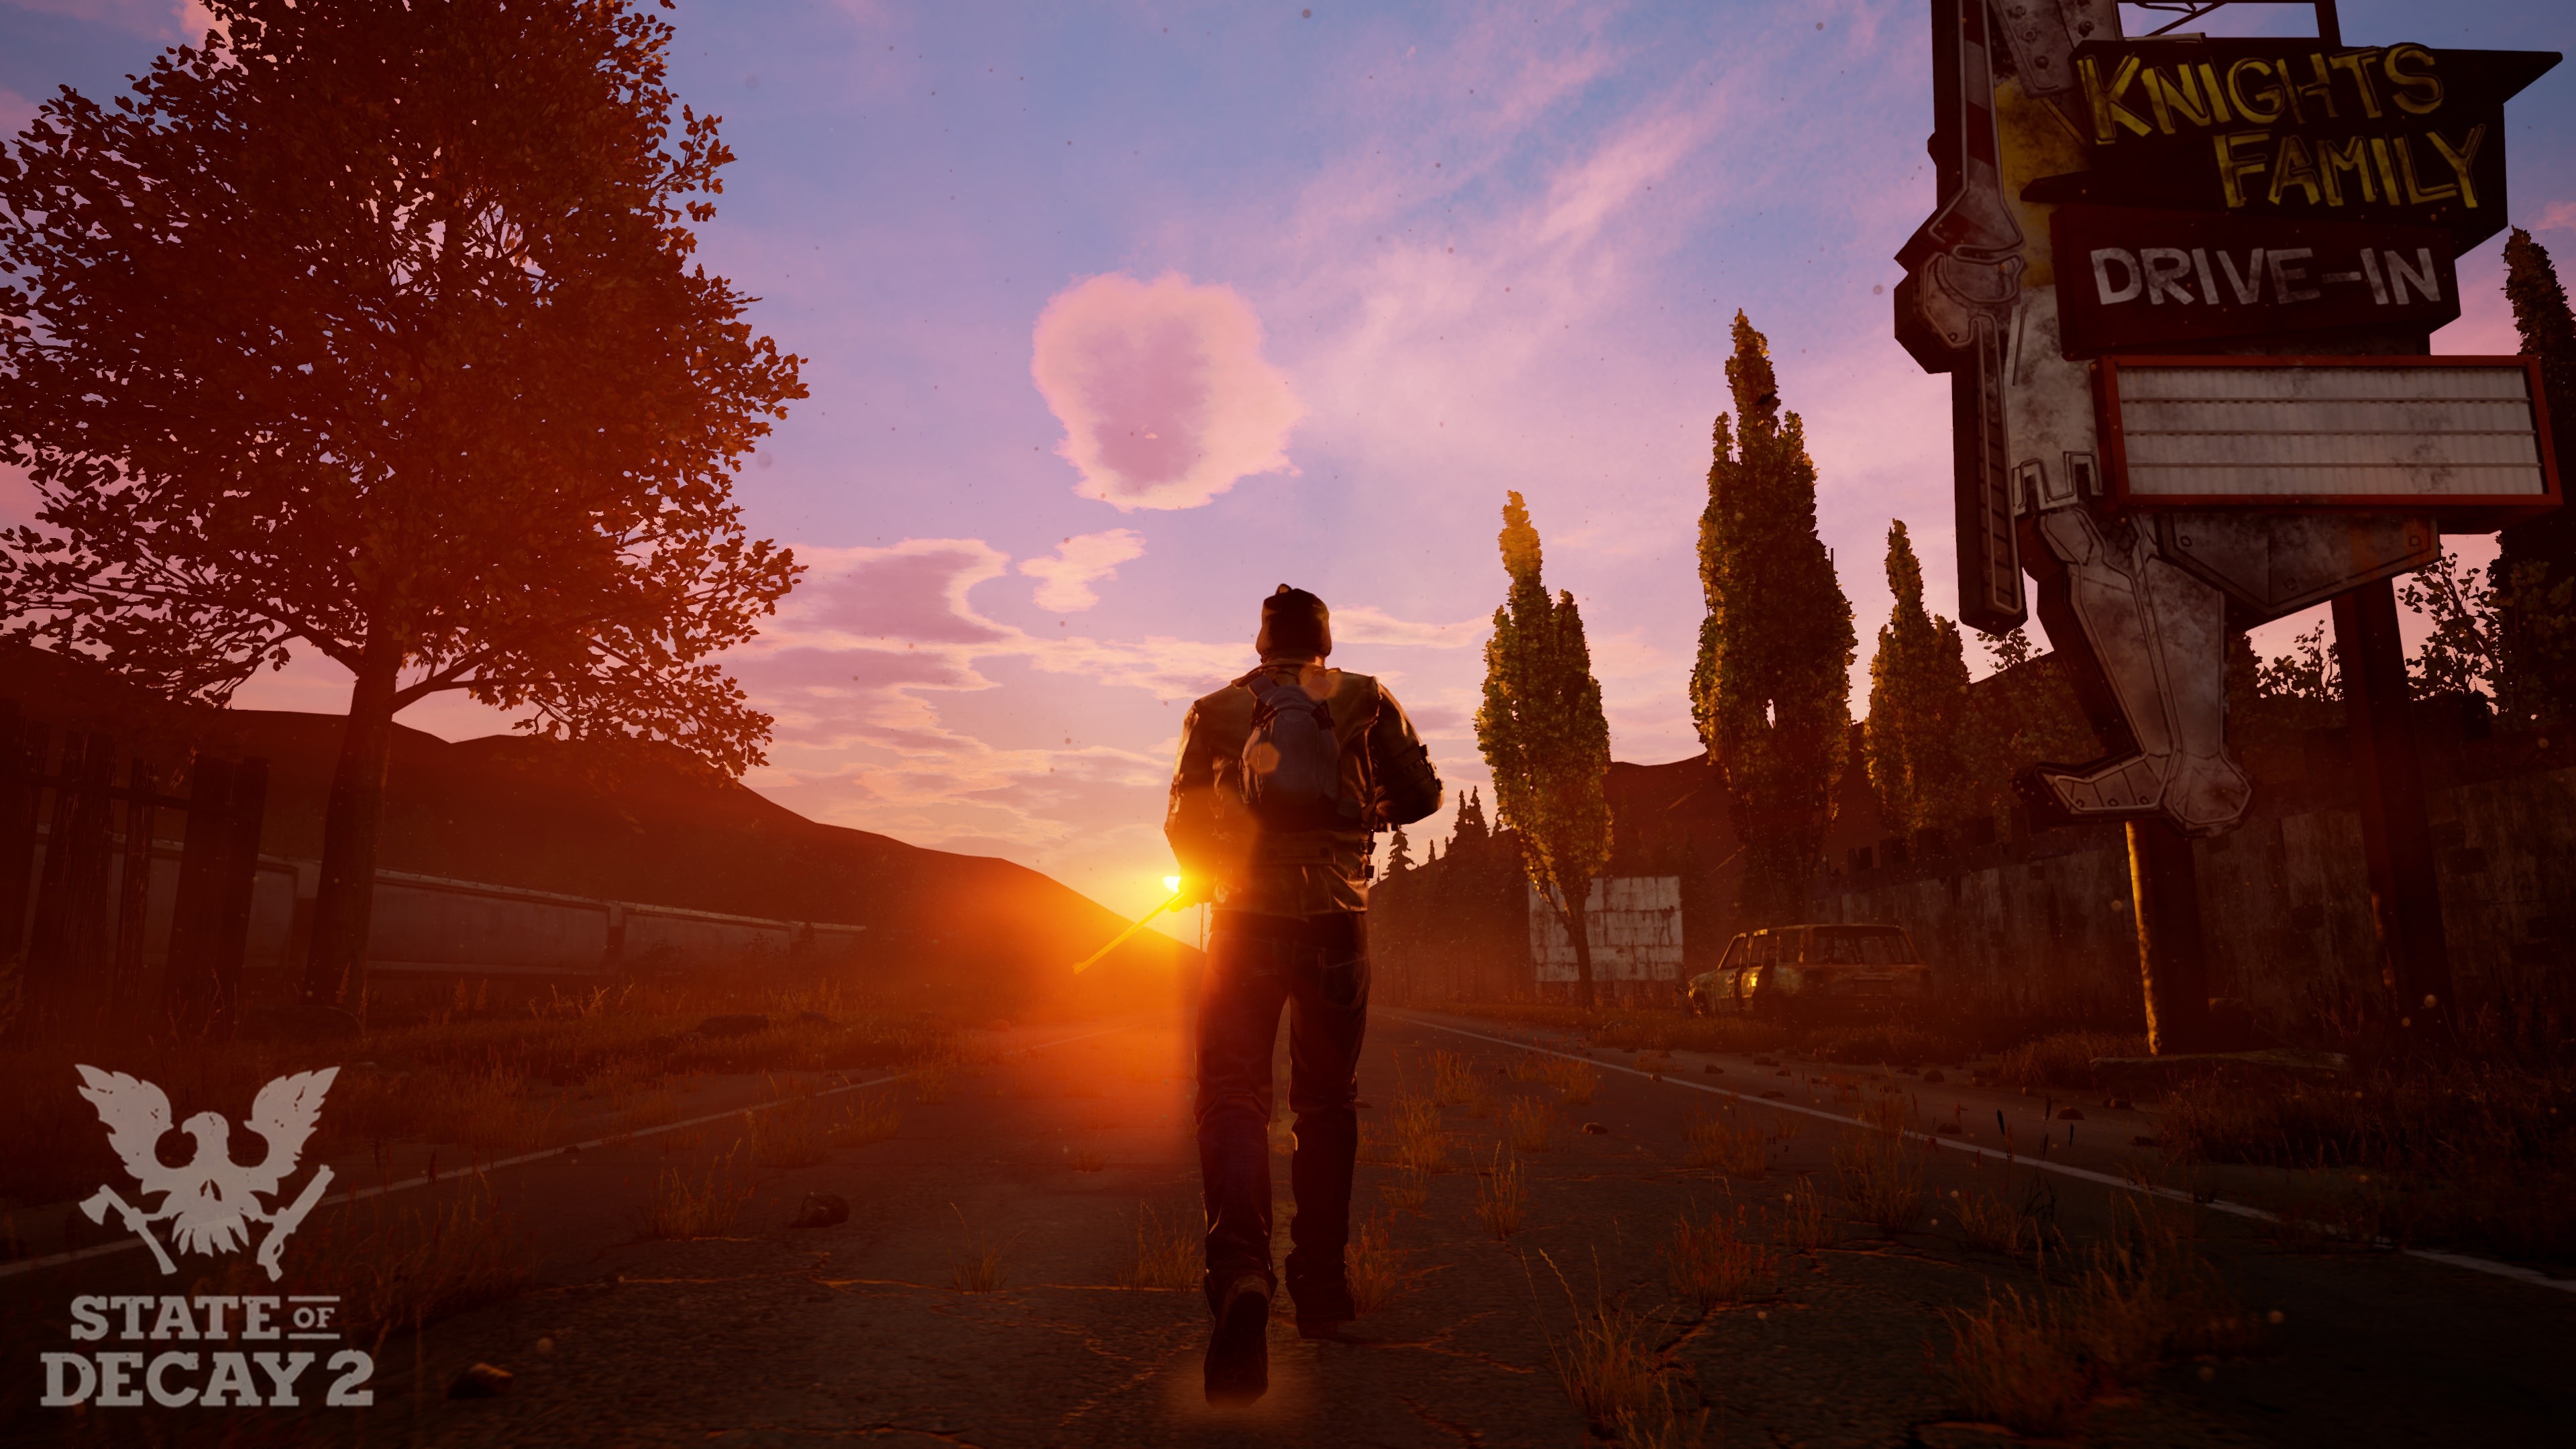 State of decay(for pc) 2: tips and tricks – Merit Coba